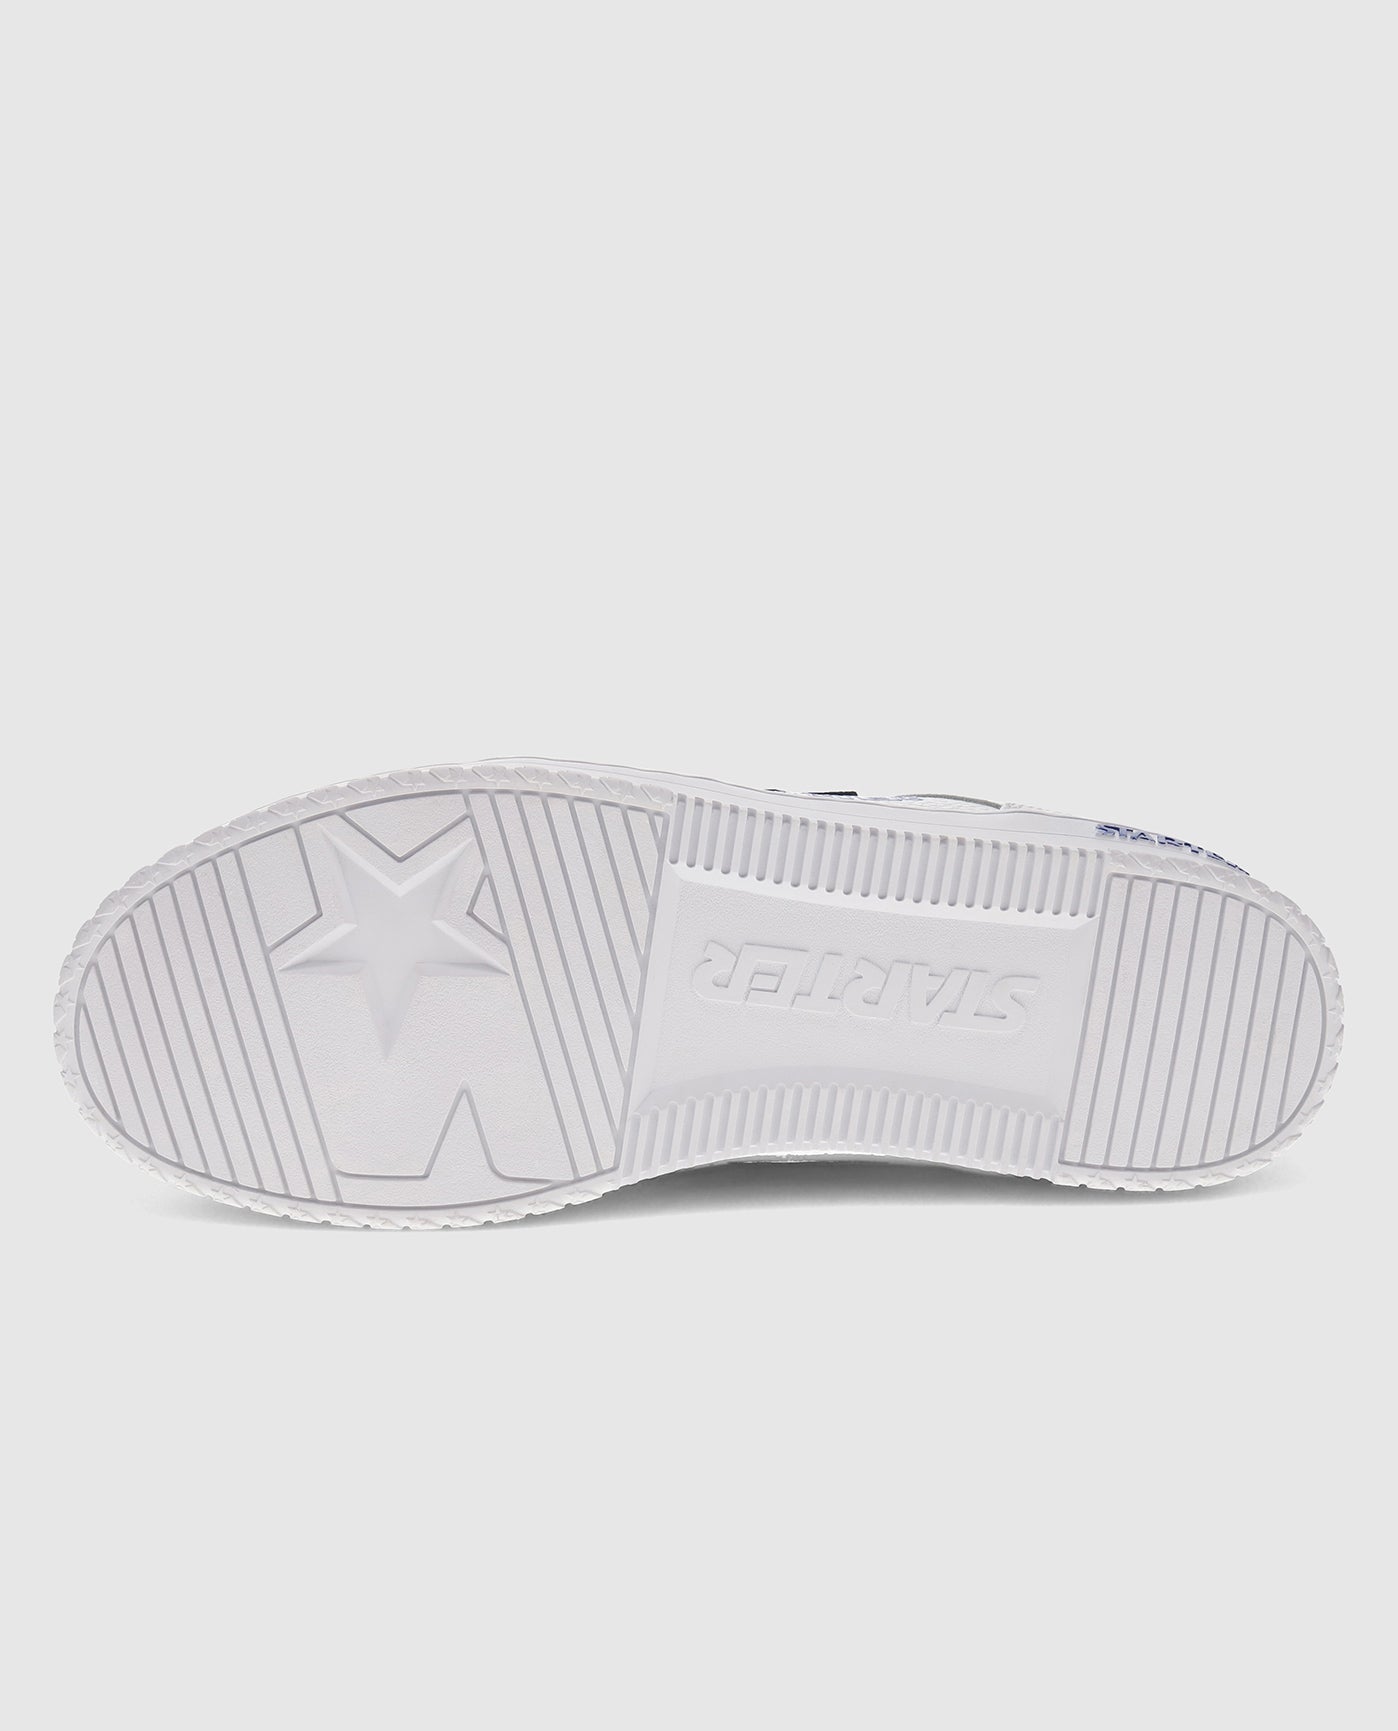 Outsole of Blue and White Starter LFS 1 Sneakers | Blue White